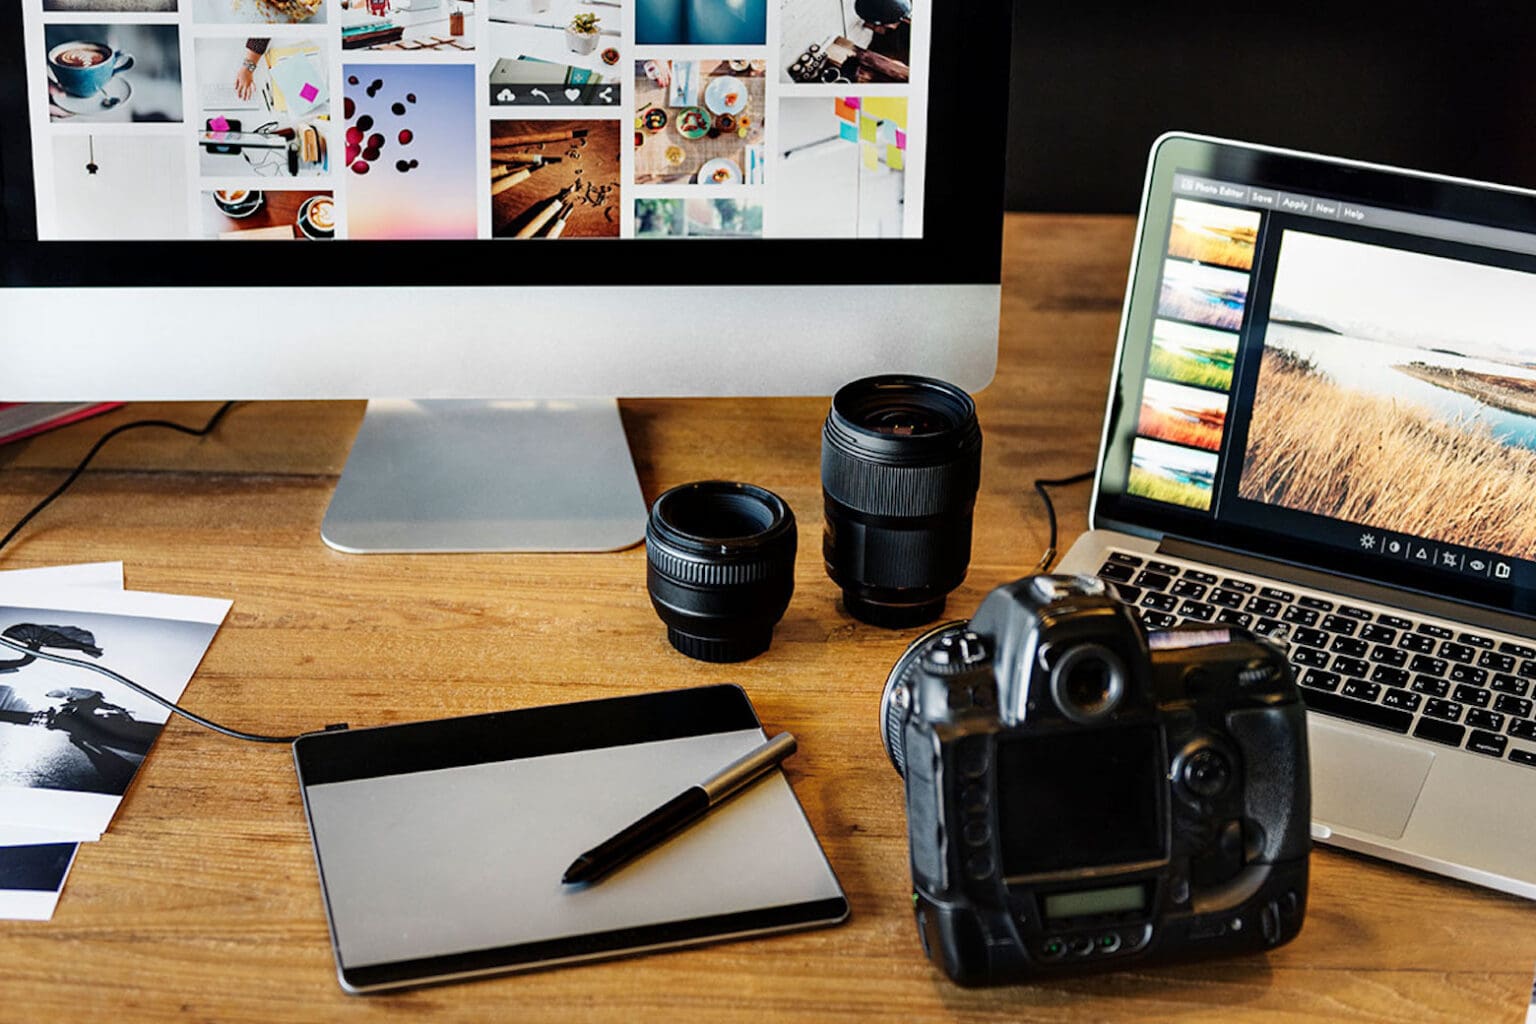 Edit your images like a pro with this award-winning AI photo editor for only $120.